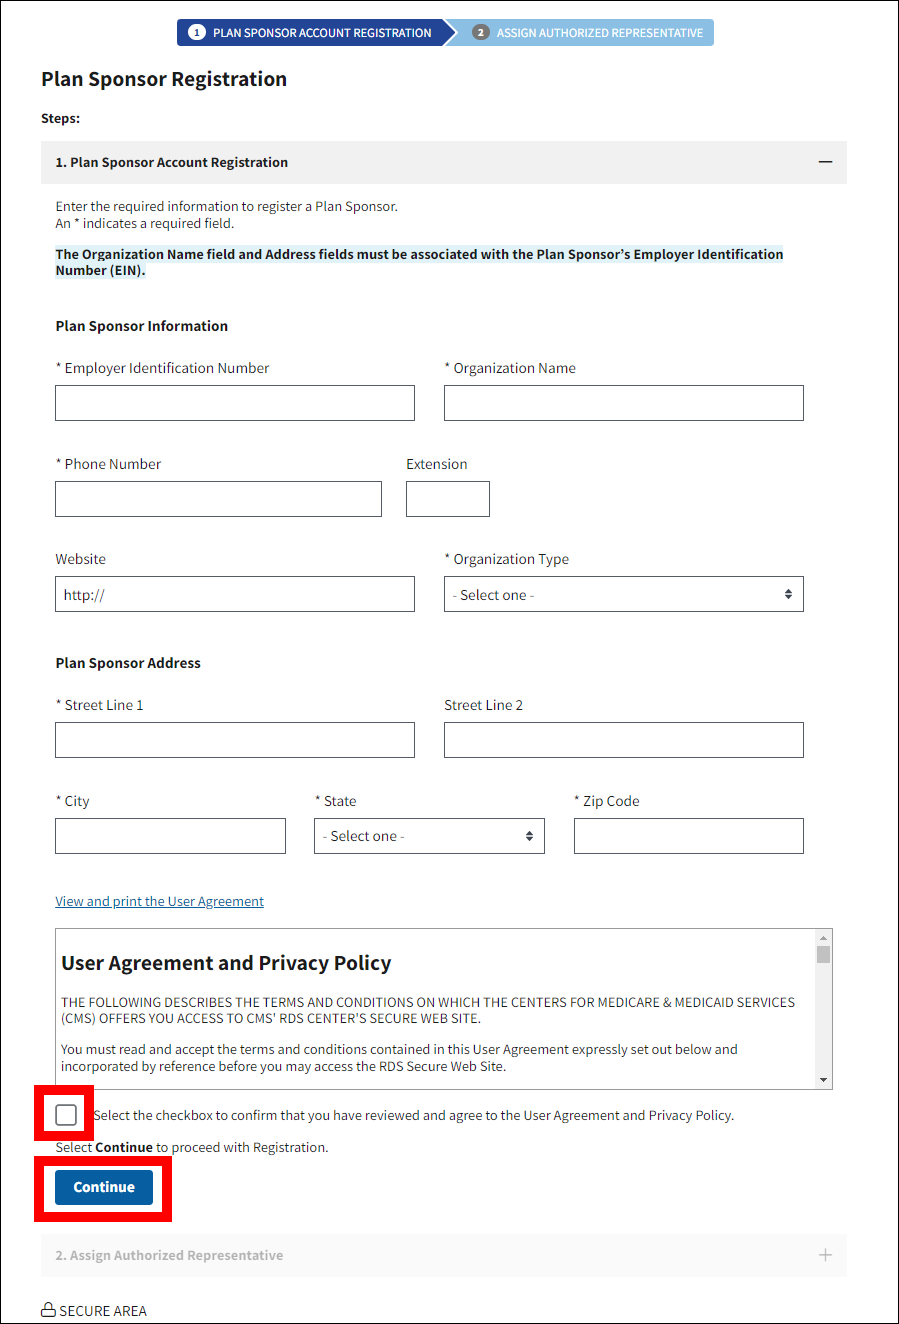 Plan Sponsor Registration page with User Agreement checkbox and Continue button highlighted.